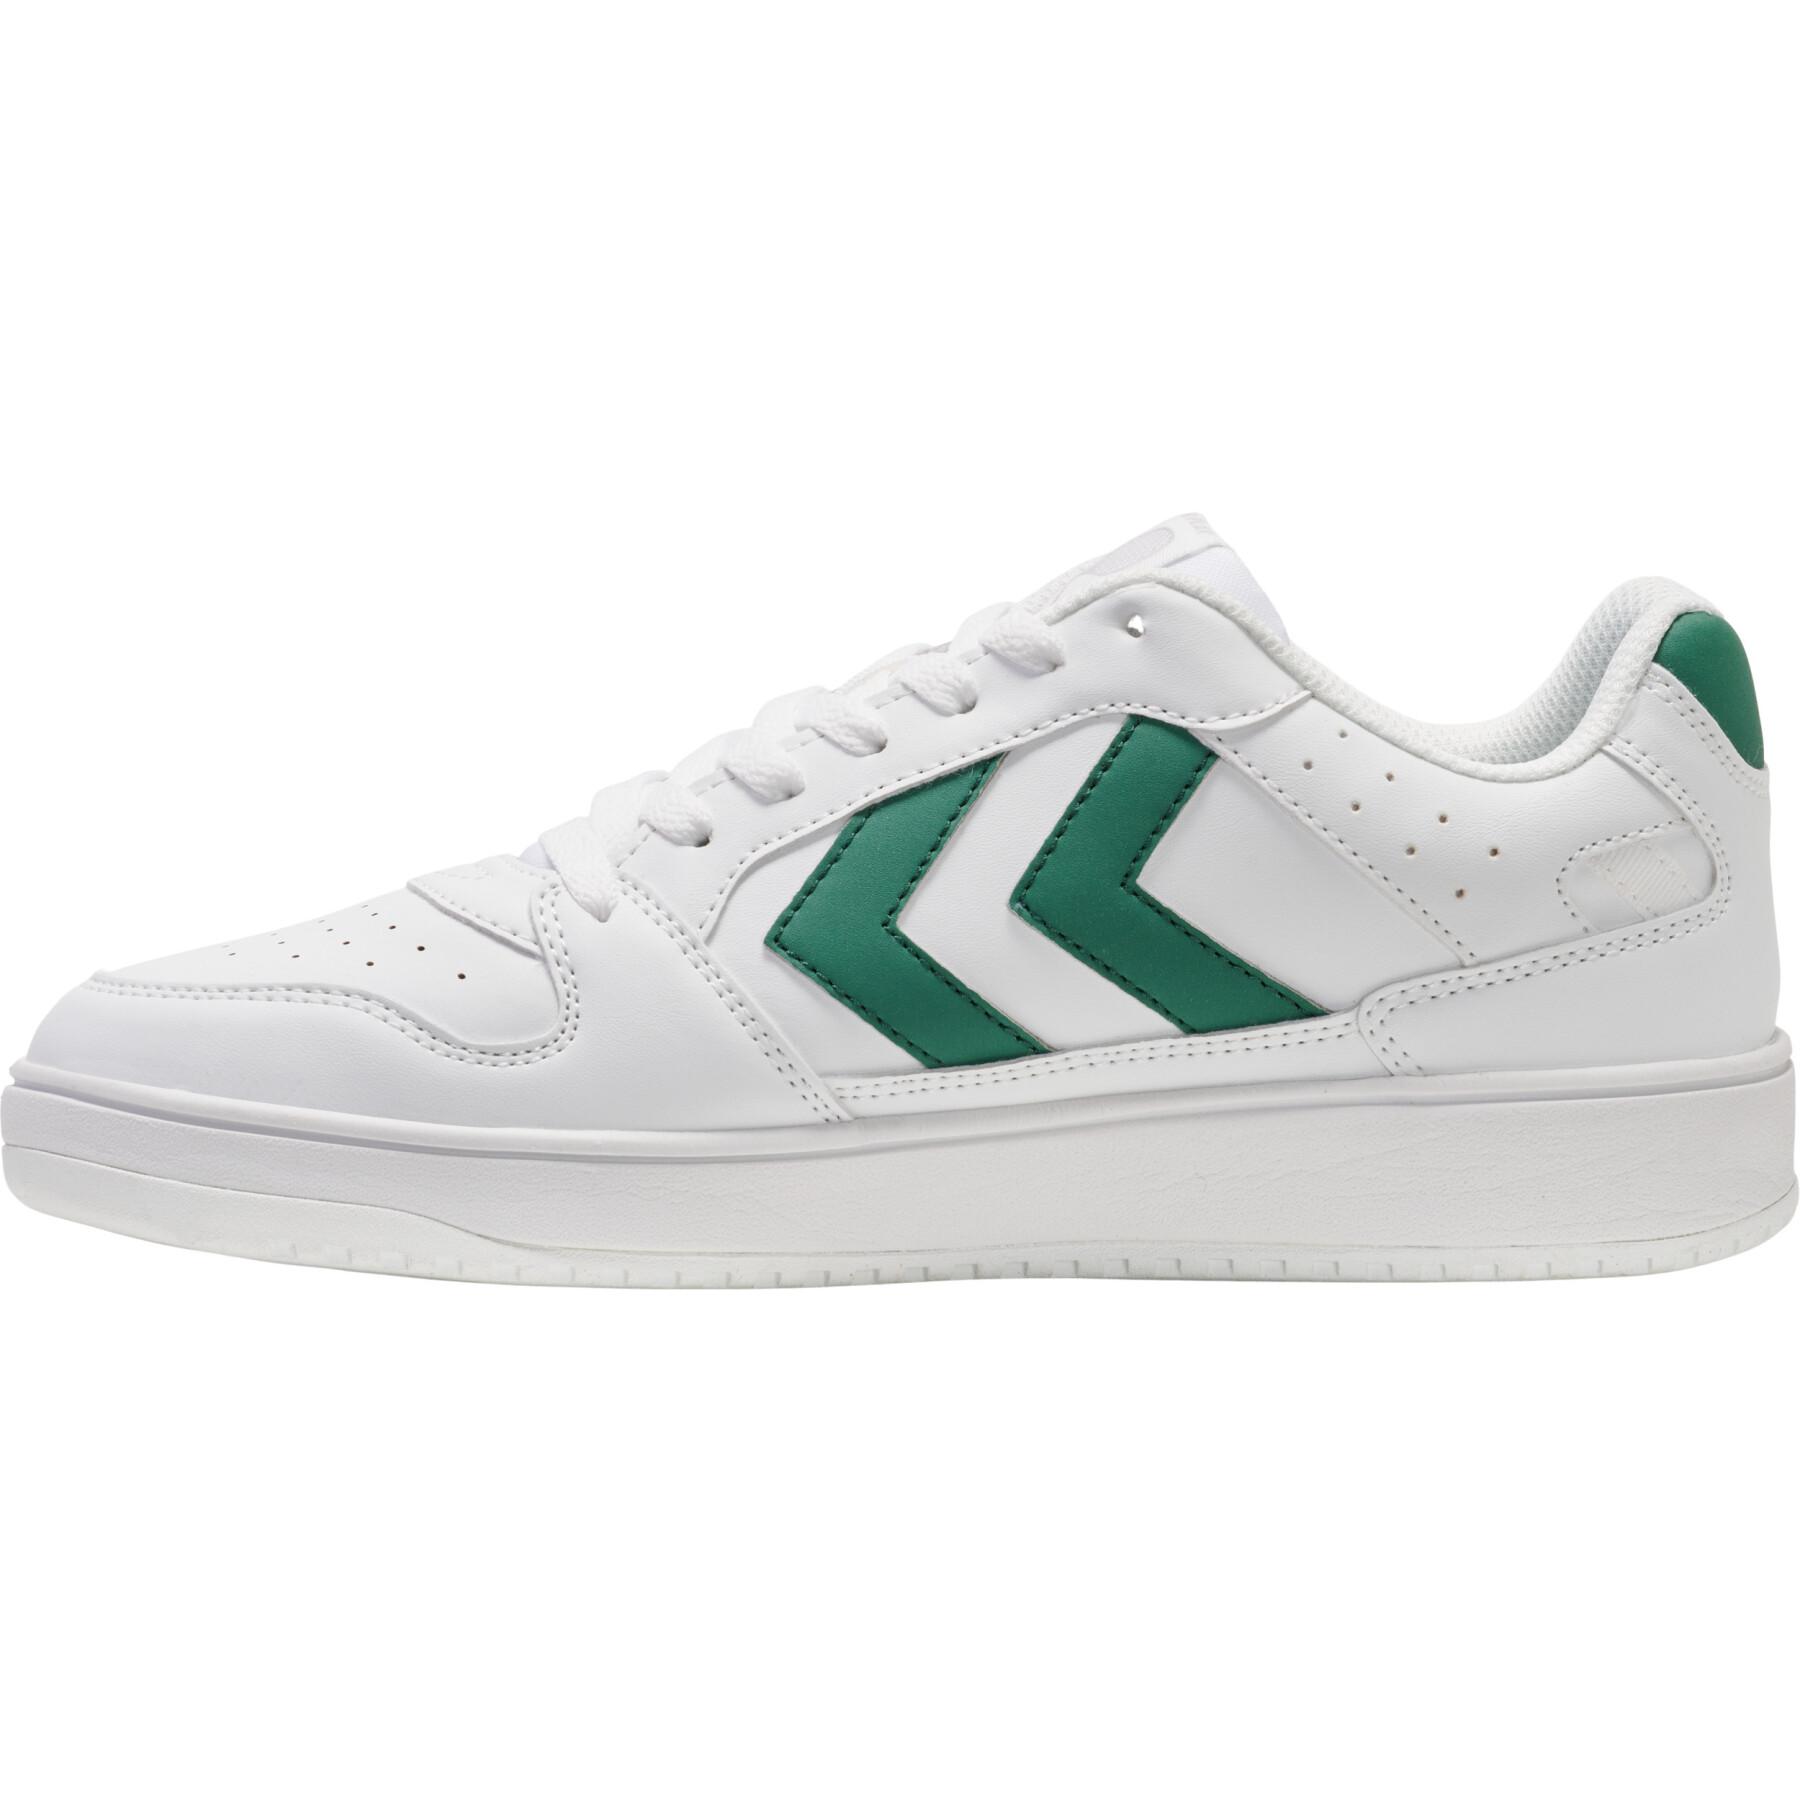 Sneakers Hummel St. Power Play Cl